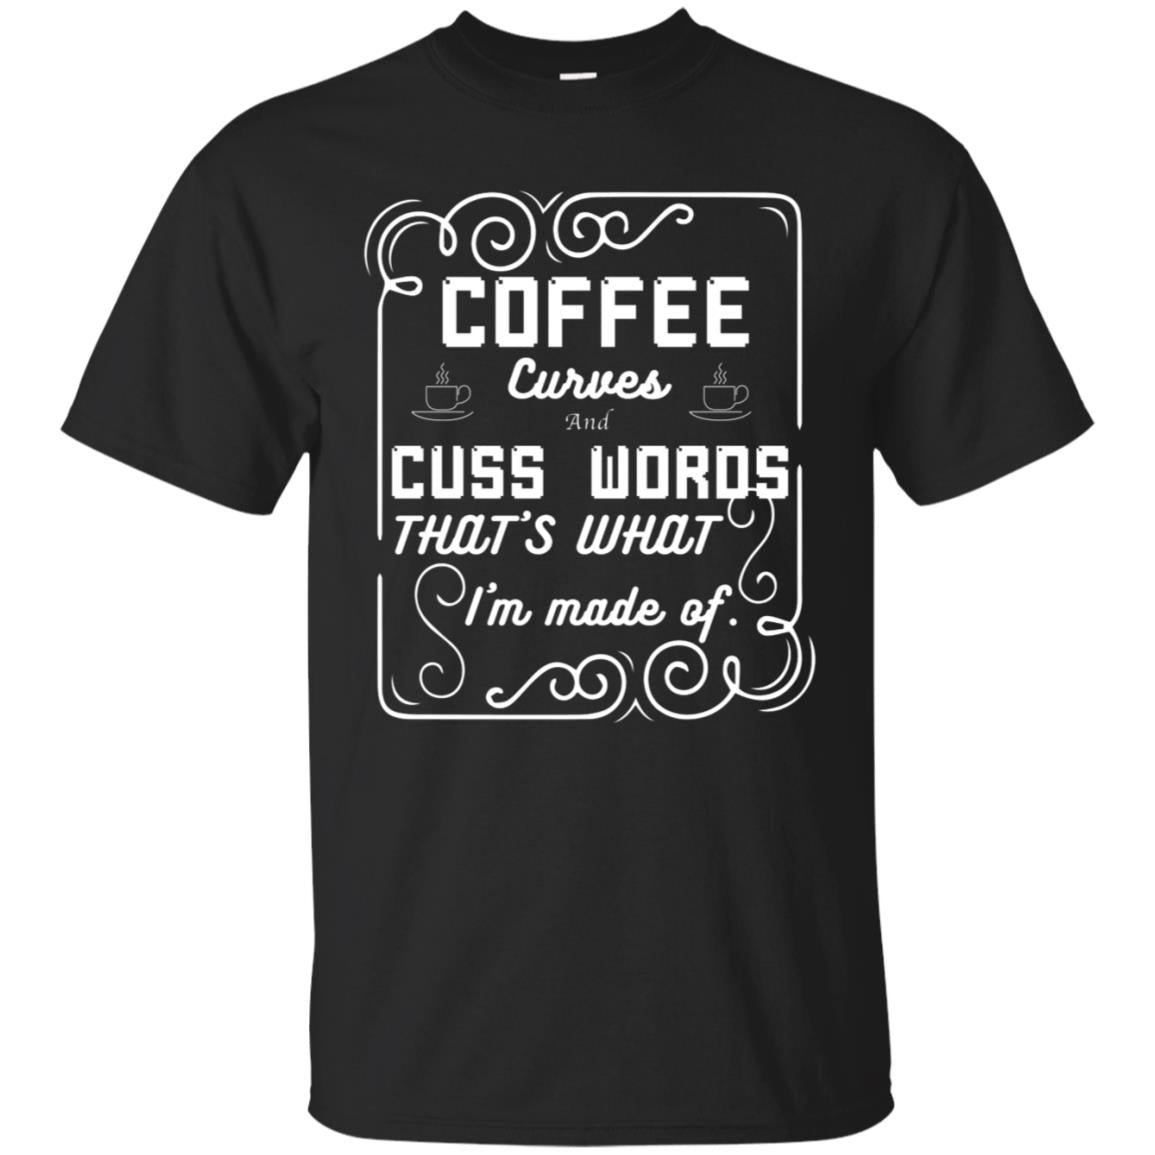 Coffee Curves And Cuss Words That's What I'm Made Of ShirtG200 Gildan Ultra Cotton T-Shirt